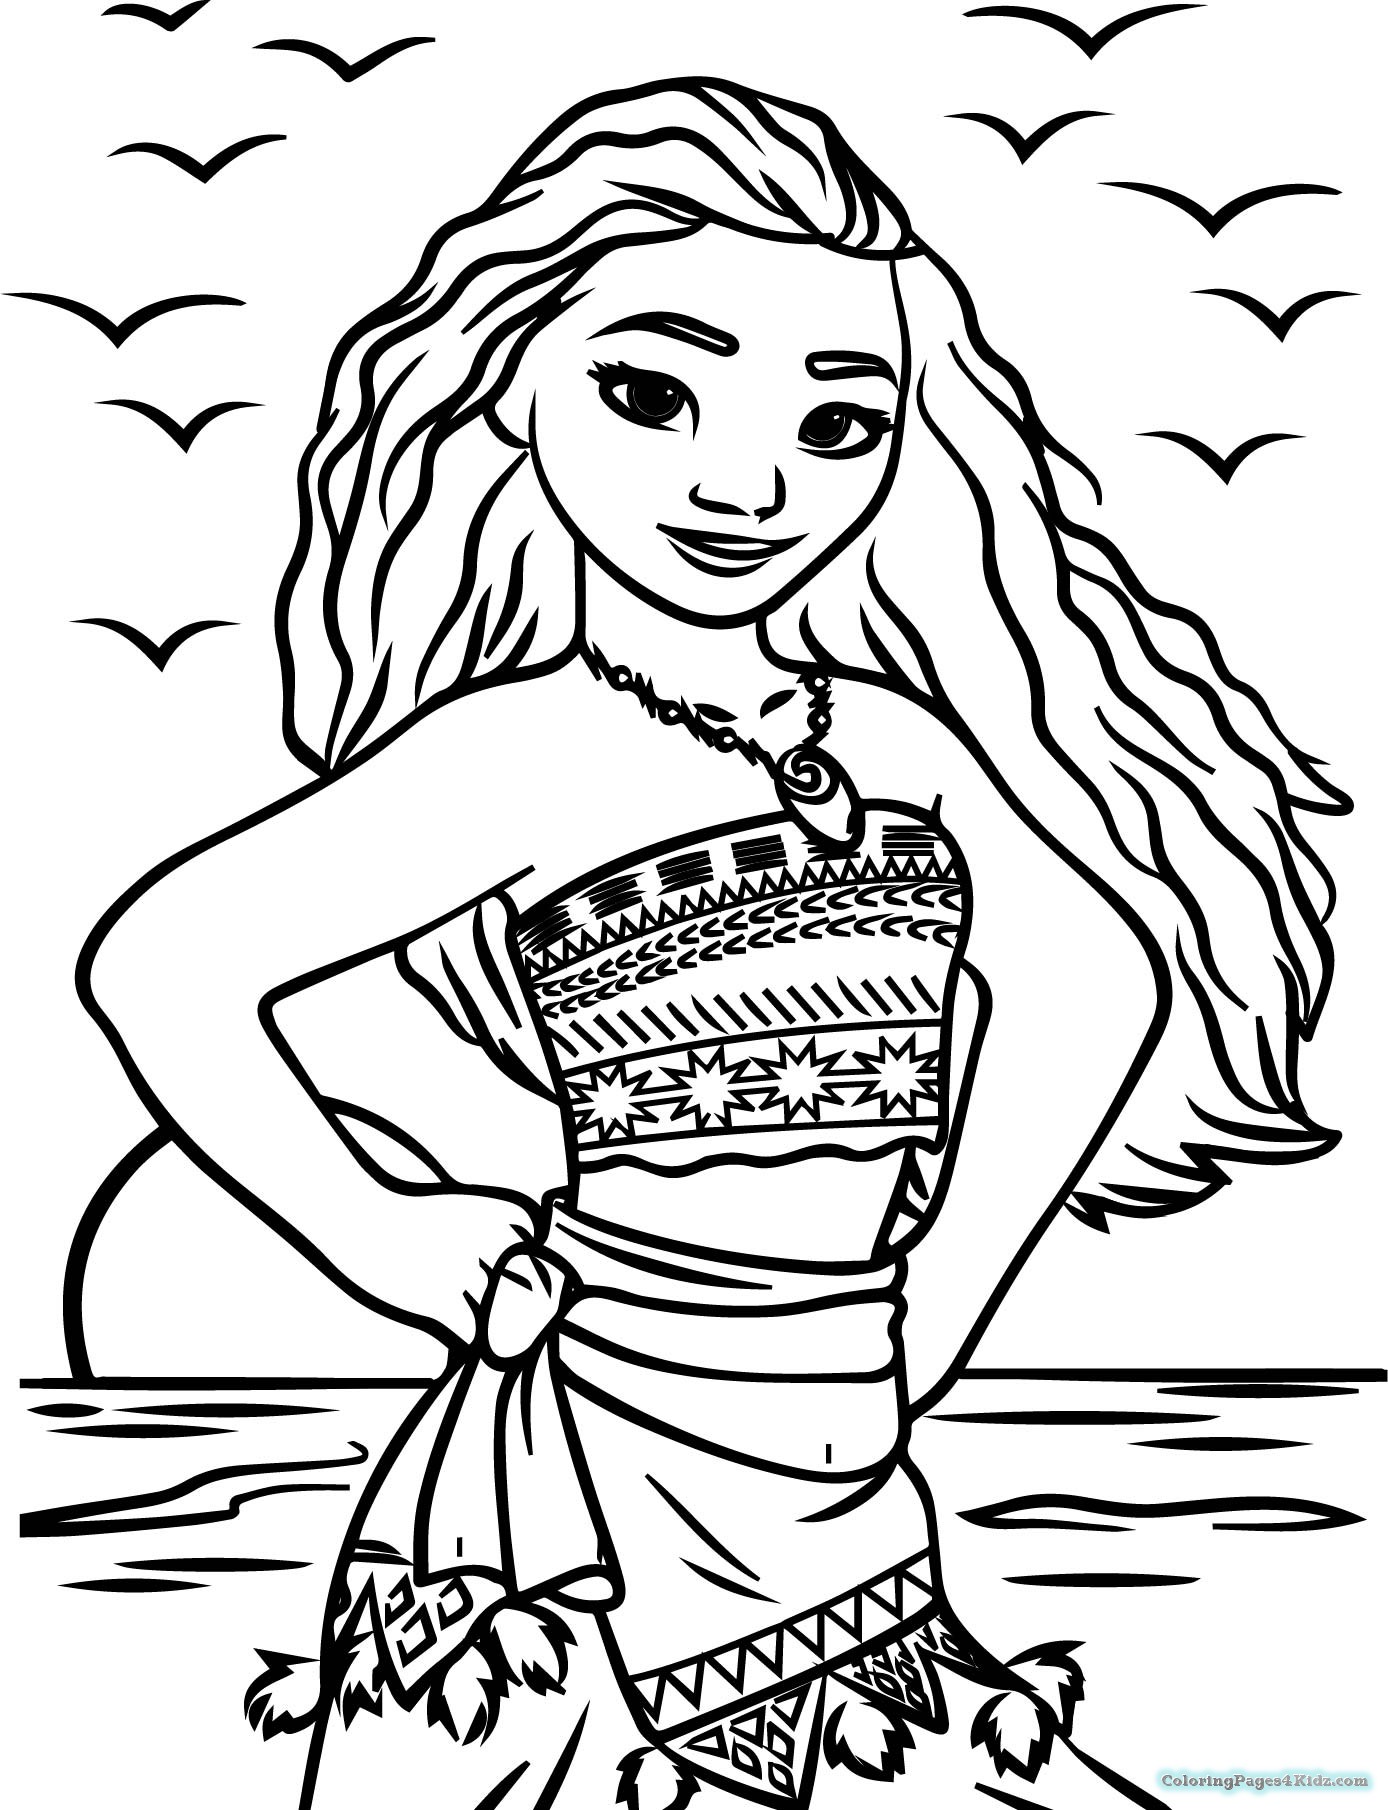 Girl Coloring Pages Moana - Coloring Pages For Kids